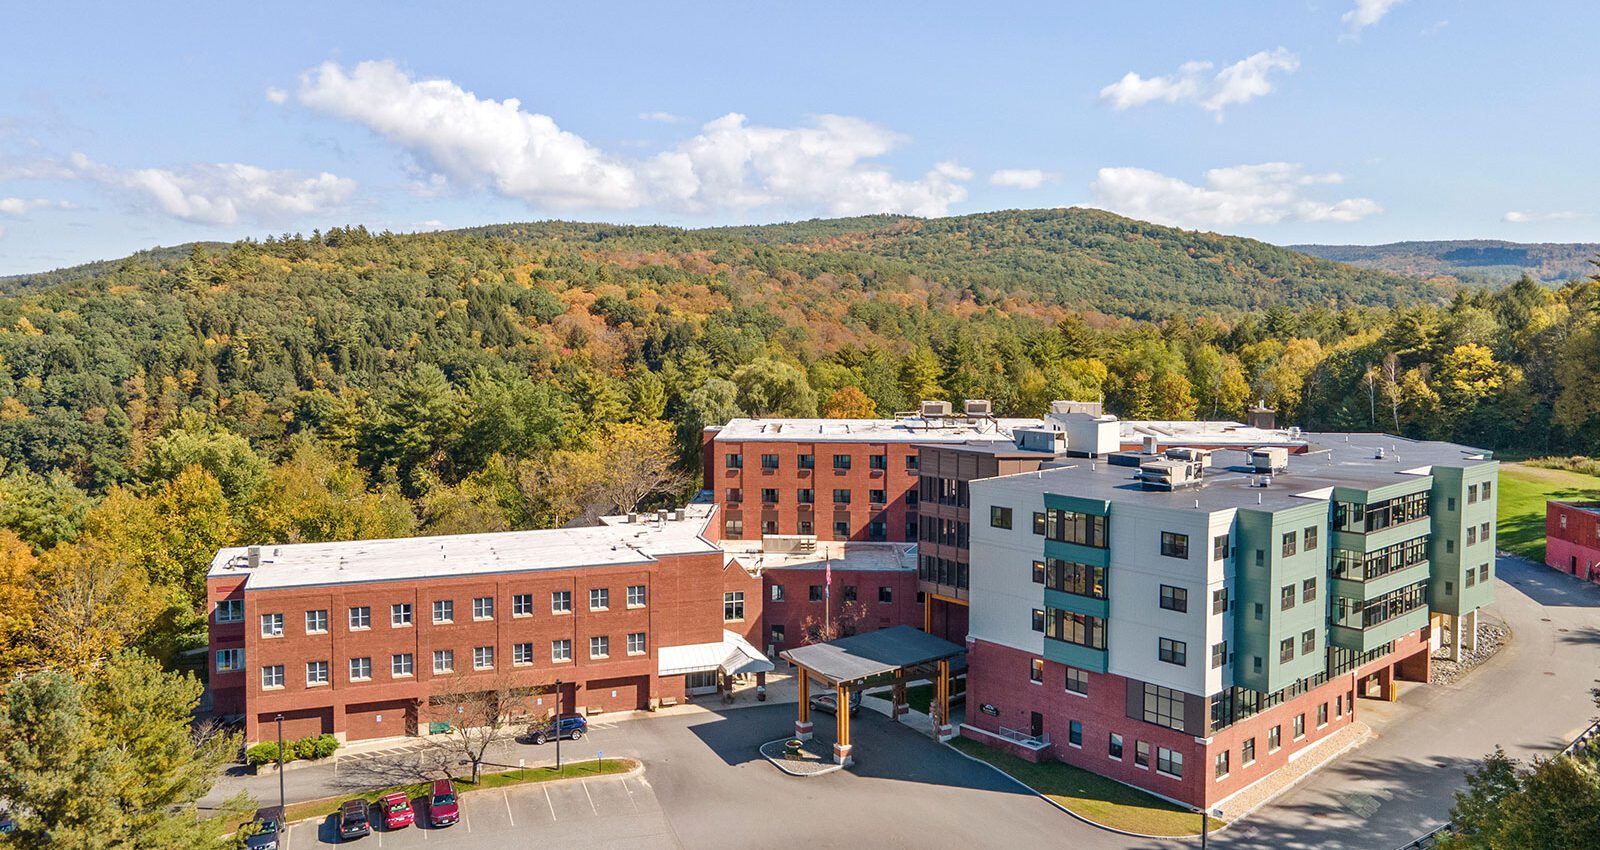 Maplewood Nursing Home – Cheshire County, NH